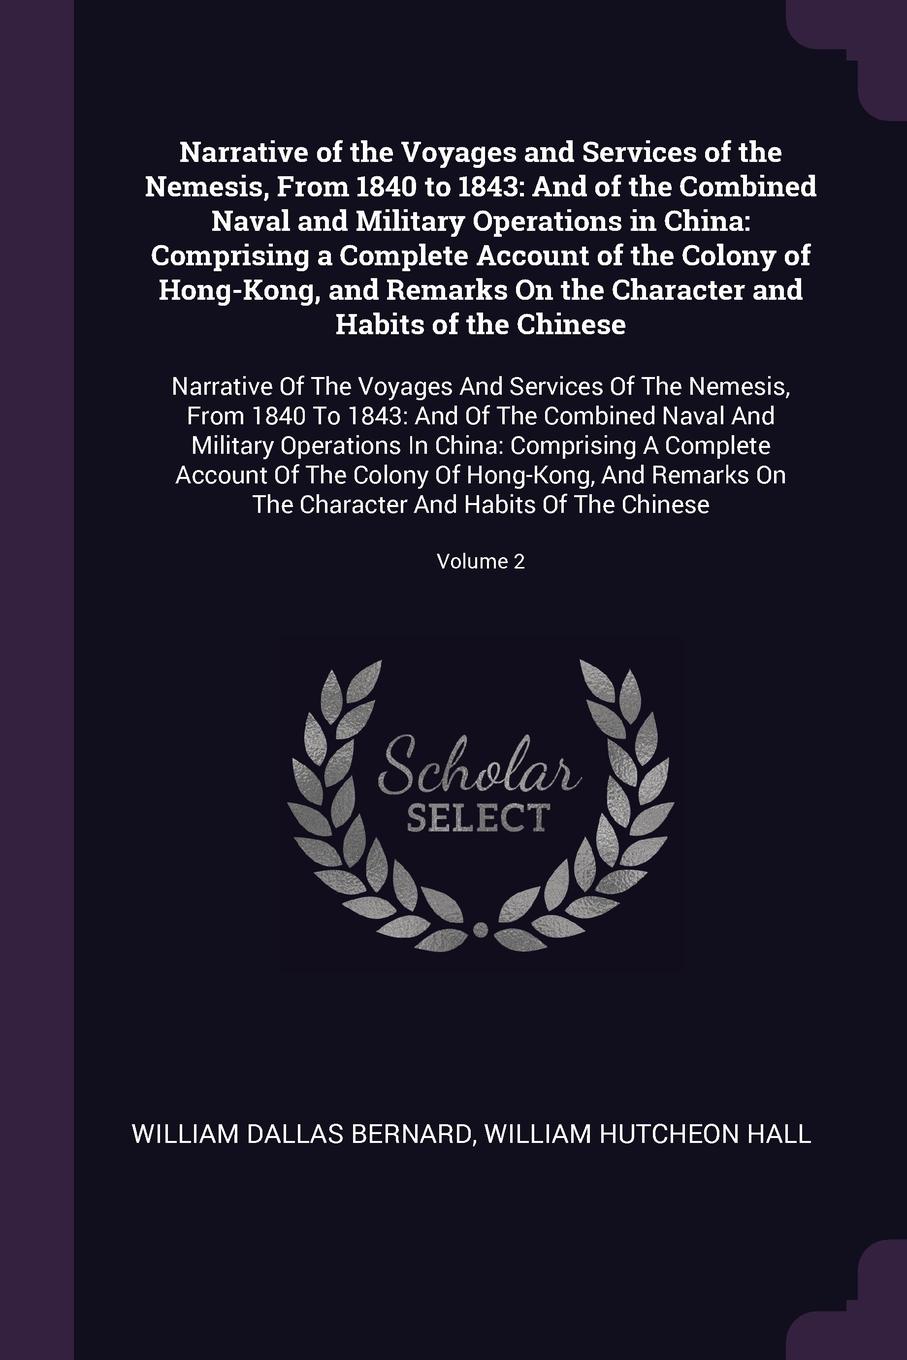 Narrative of the Voyages and Services of the Nemesis, From 1840 to 1843. And of the Combined Naval and Military Operations in China: Comprising a Complete Account of the Colony of Hong-Kong, and Remarks On the Character and Habits of the Chinese: ...